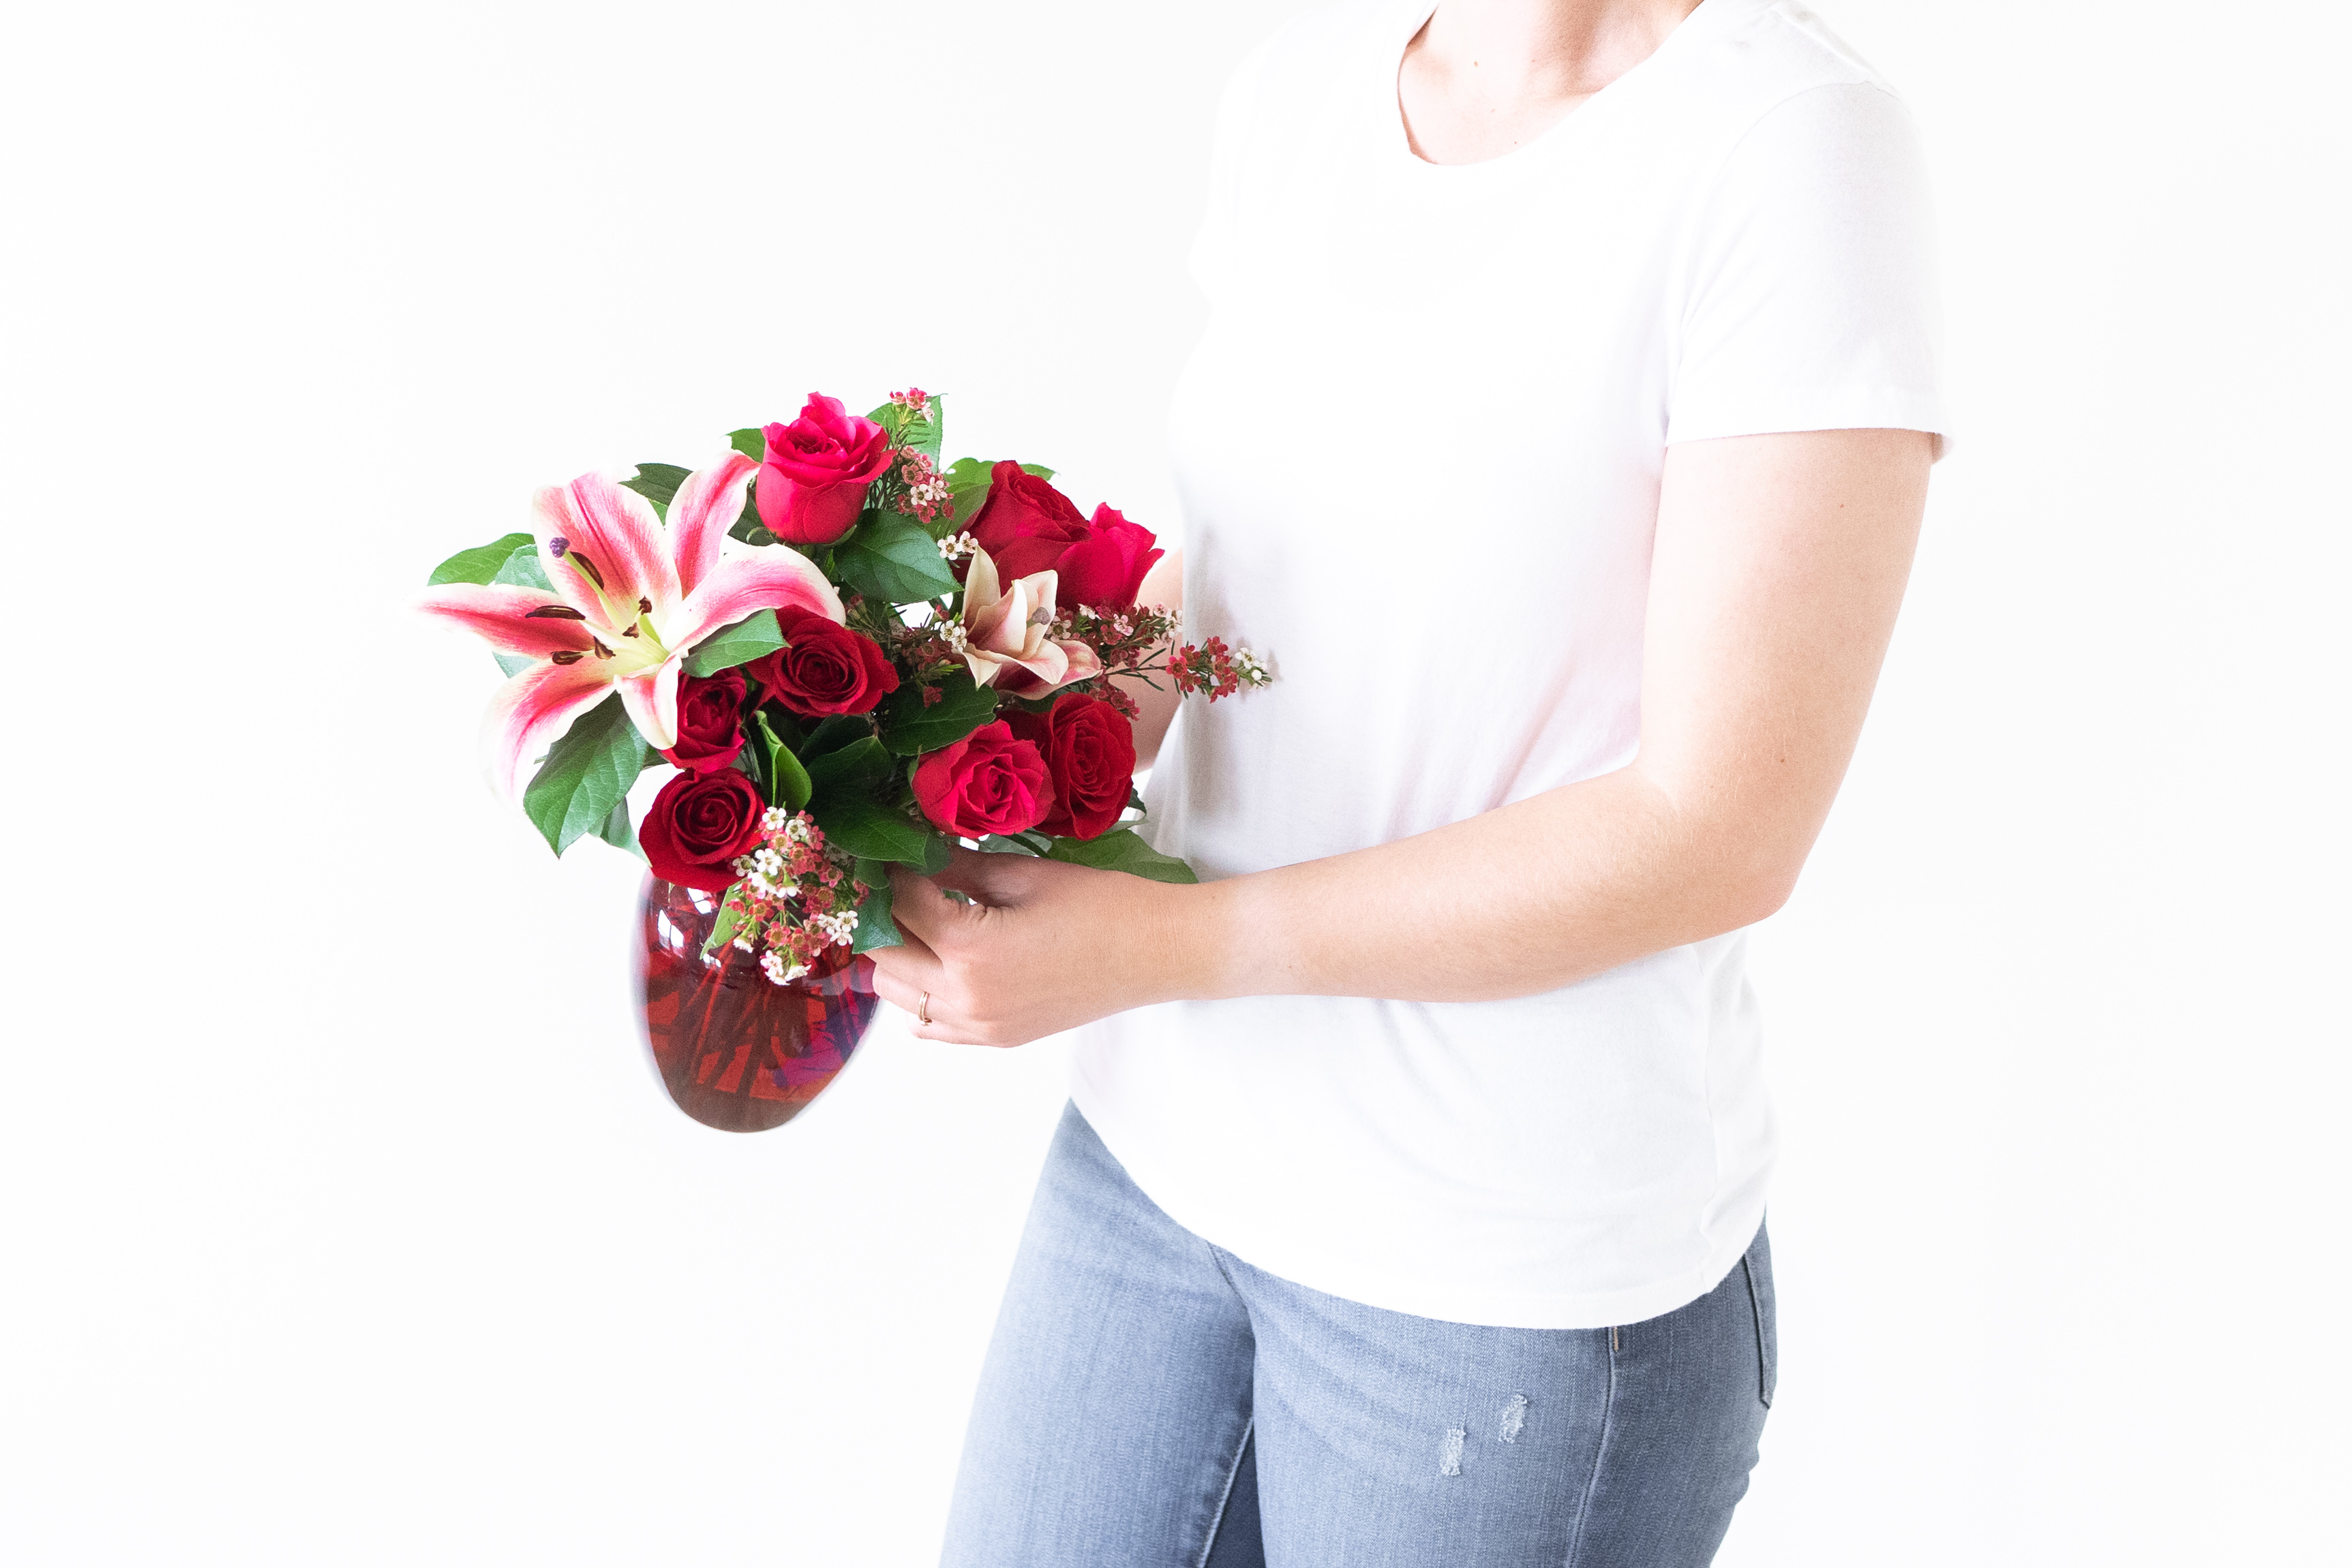 What are the best flowers for a woman?